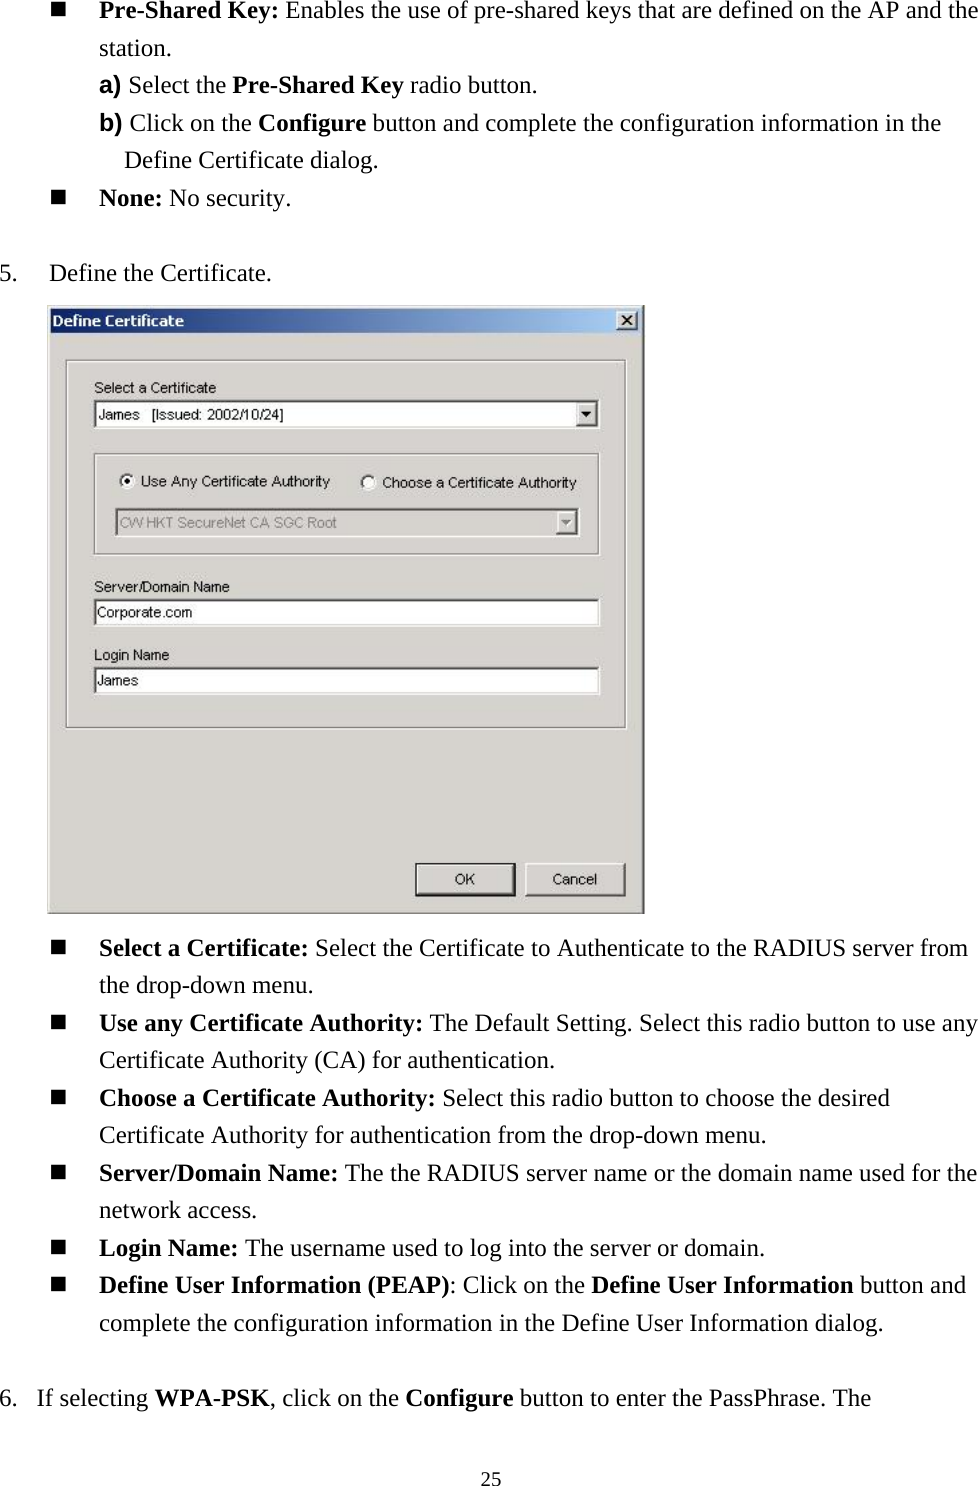  25  Pre-Shared Key: Enables the use of pre-shared keys that are defined on the AP and the station. a) Select the Pre-Shared Key radio button. b) Click on the Configure button and complete the configuration information in the Define Certificate dialog.   None: No security.  5.    Define the Certificate.         Select a Certificate: Select the Certificate to Authenticate to the RADIUS server from the drop-down menu.   Use any Certificate Authority: The Default Setting. Select this radio button to use any Certificate Authority (CA) for authentication.   Choose a Certificate Authority: Select this radio button to choose the desired Certificate Authority for authentication from the drop-down menu.   Server/Domain Name: The the RADIUS server name or the domain name used for the network access.   Login Name: The username used to log into the server or domain.   Define User Information (PEAP): Click on the Define User Information button and complete the configuration information in the Define User Information dialog.  6. If selecting WPA-PSK, click on the Configure button to enter the PassPhrase. The 